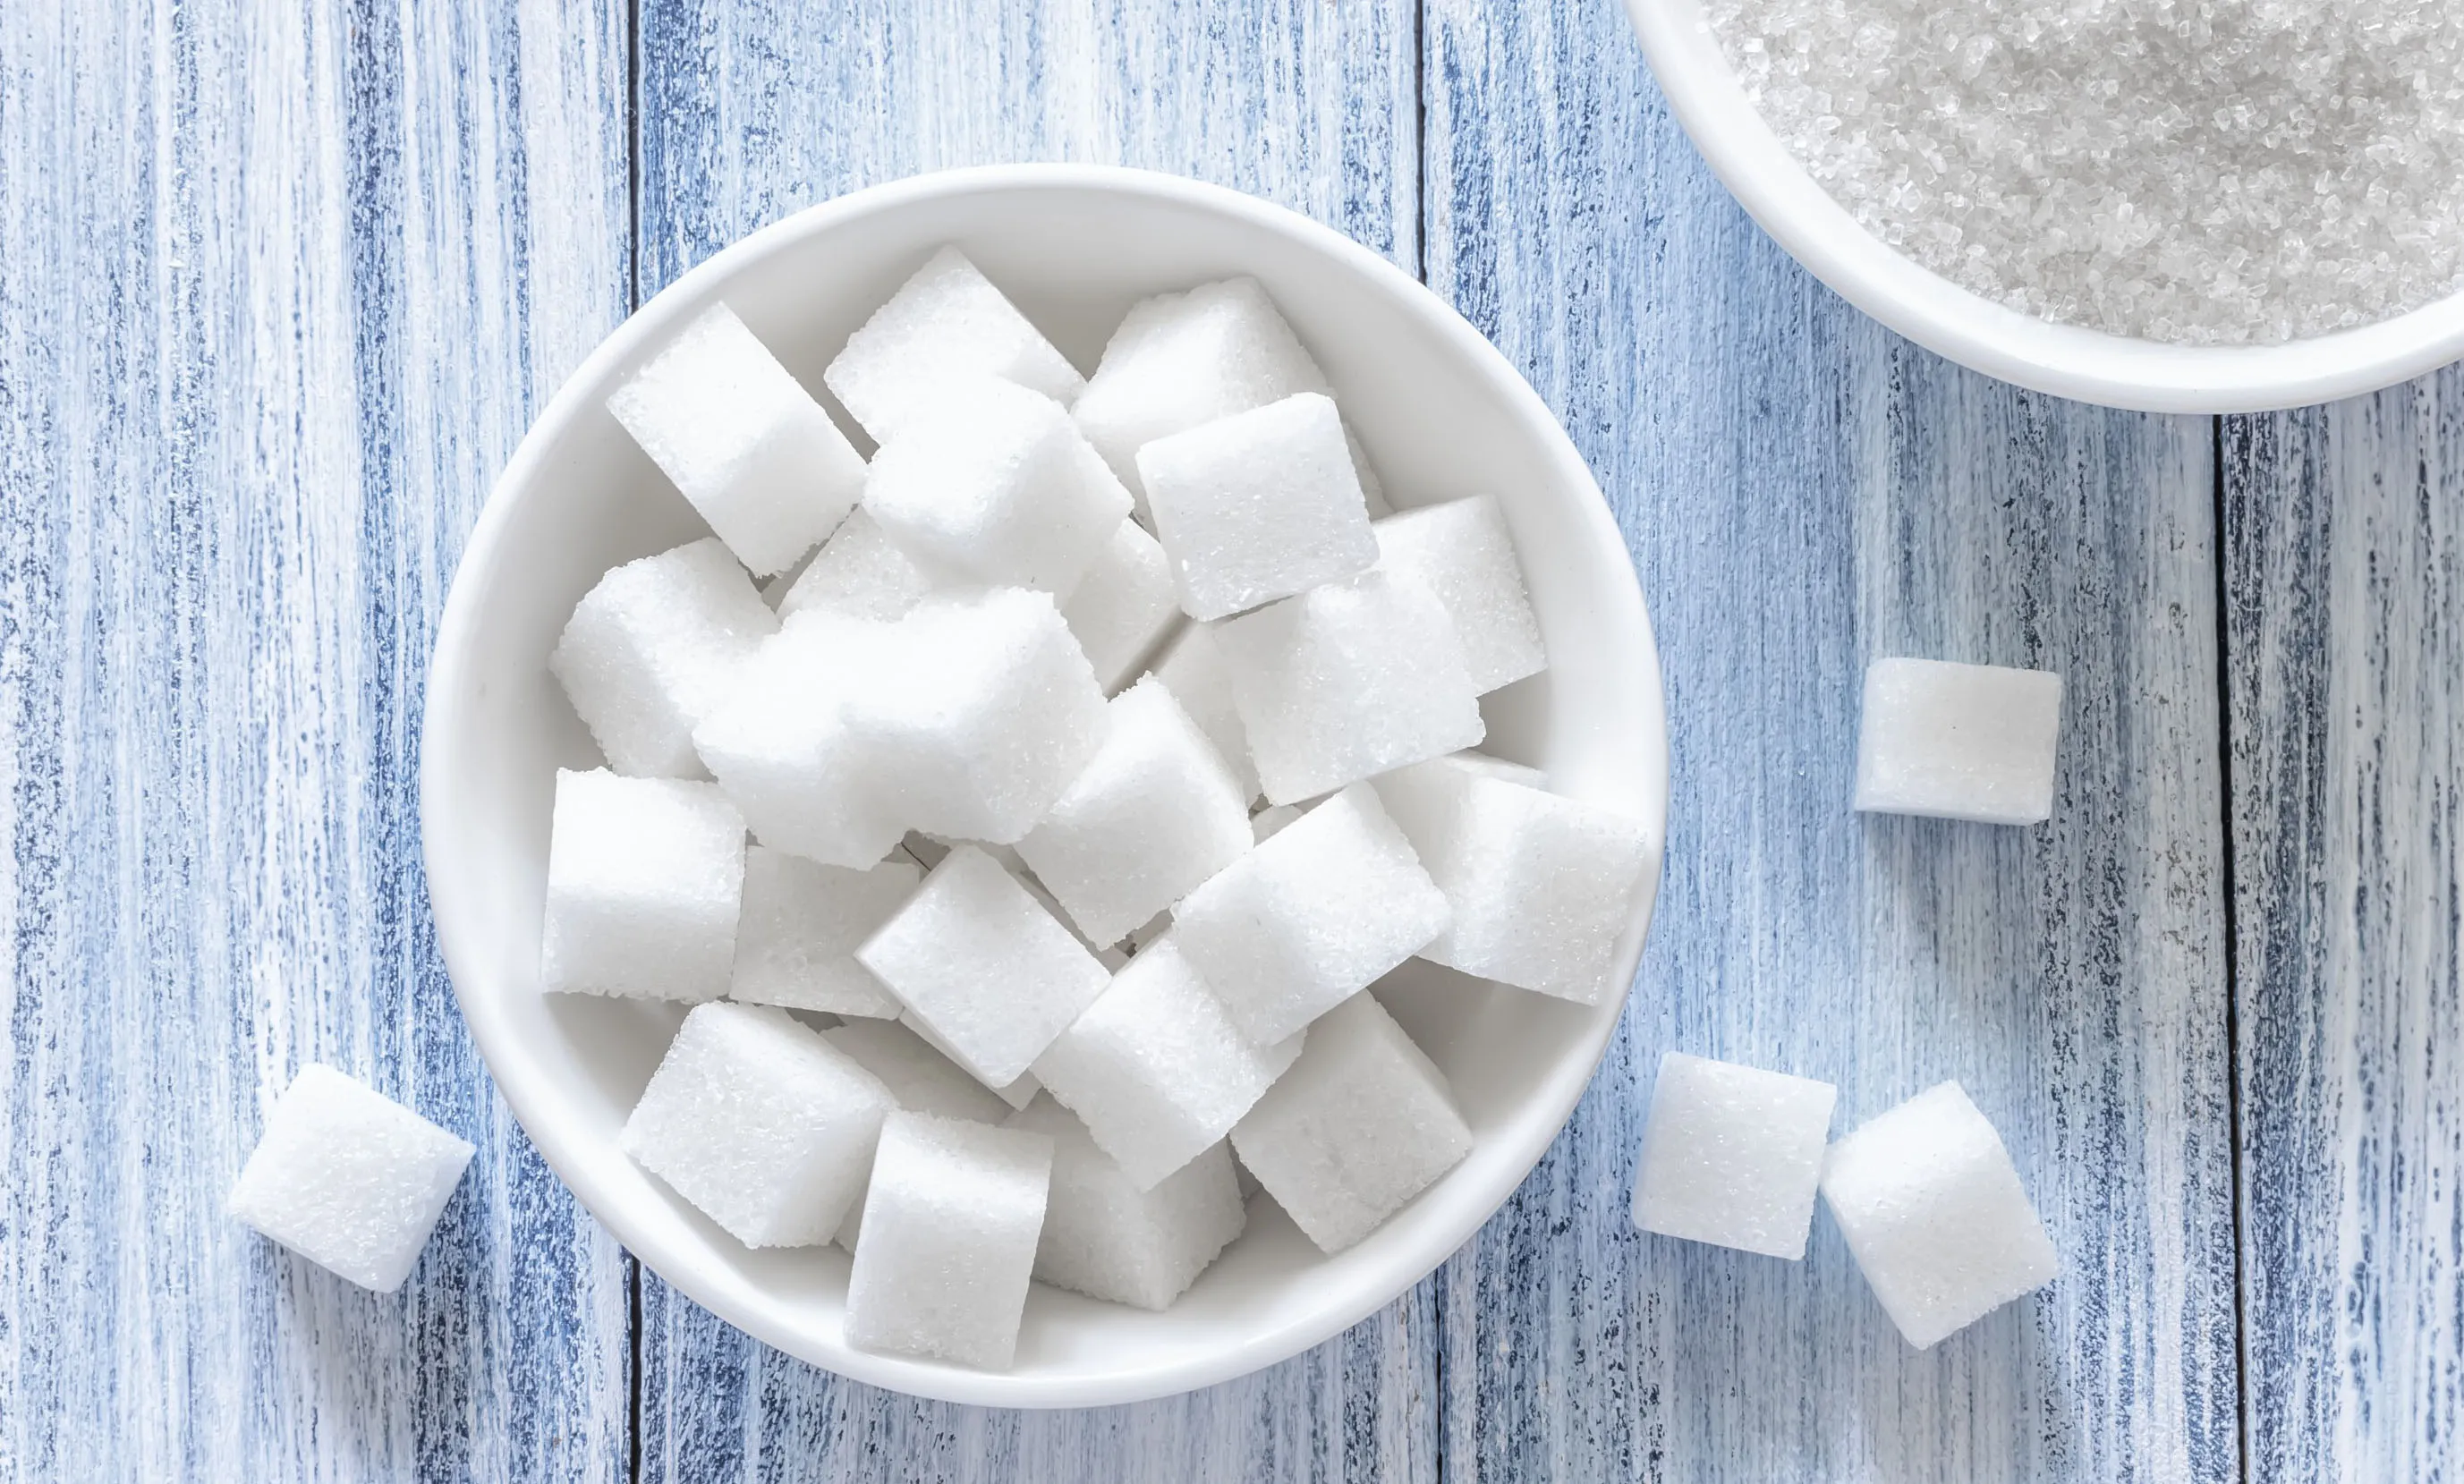 What Is Healthier: Natural Sugar, Table Sugar Or Artificial Sweeteners?